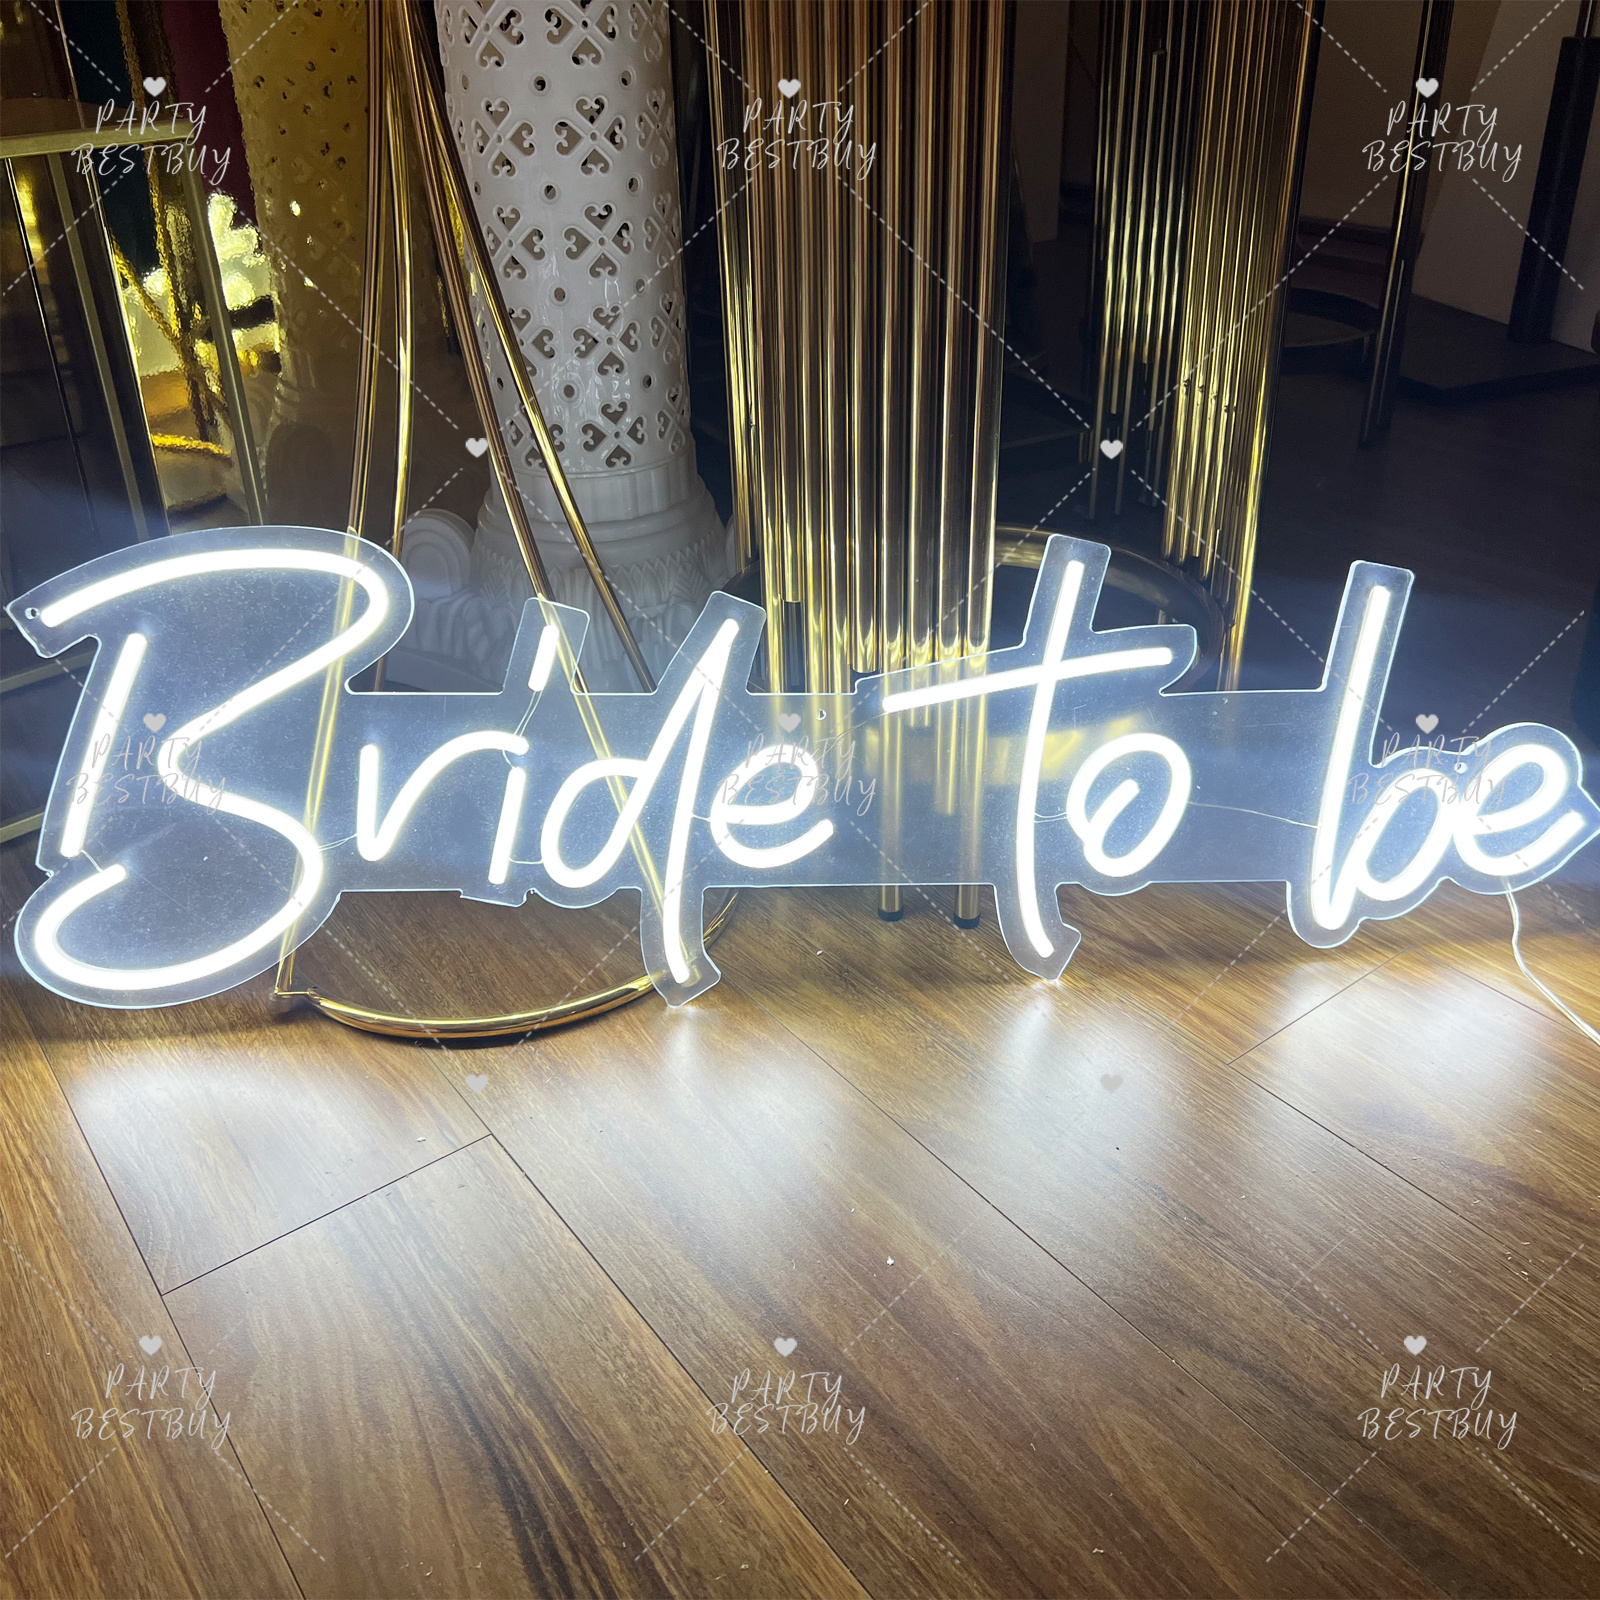 Bride to be RGB LED Neon Lights Sign Board Acrylic Party Wedding Event ...